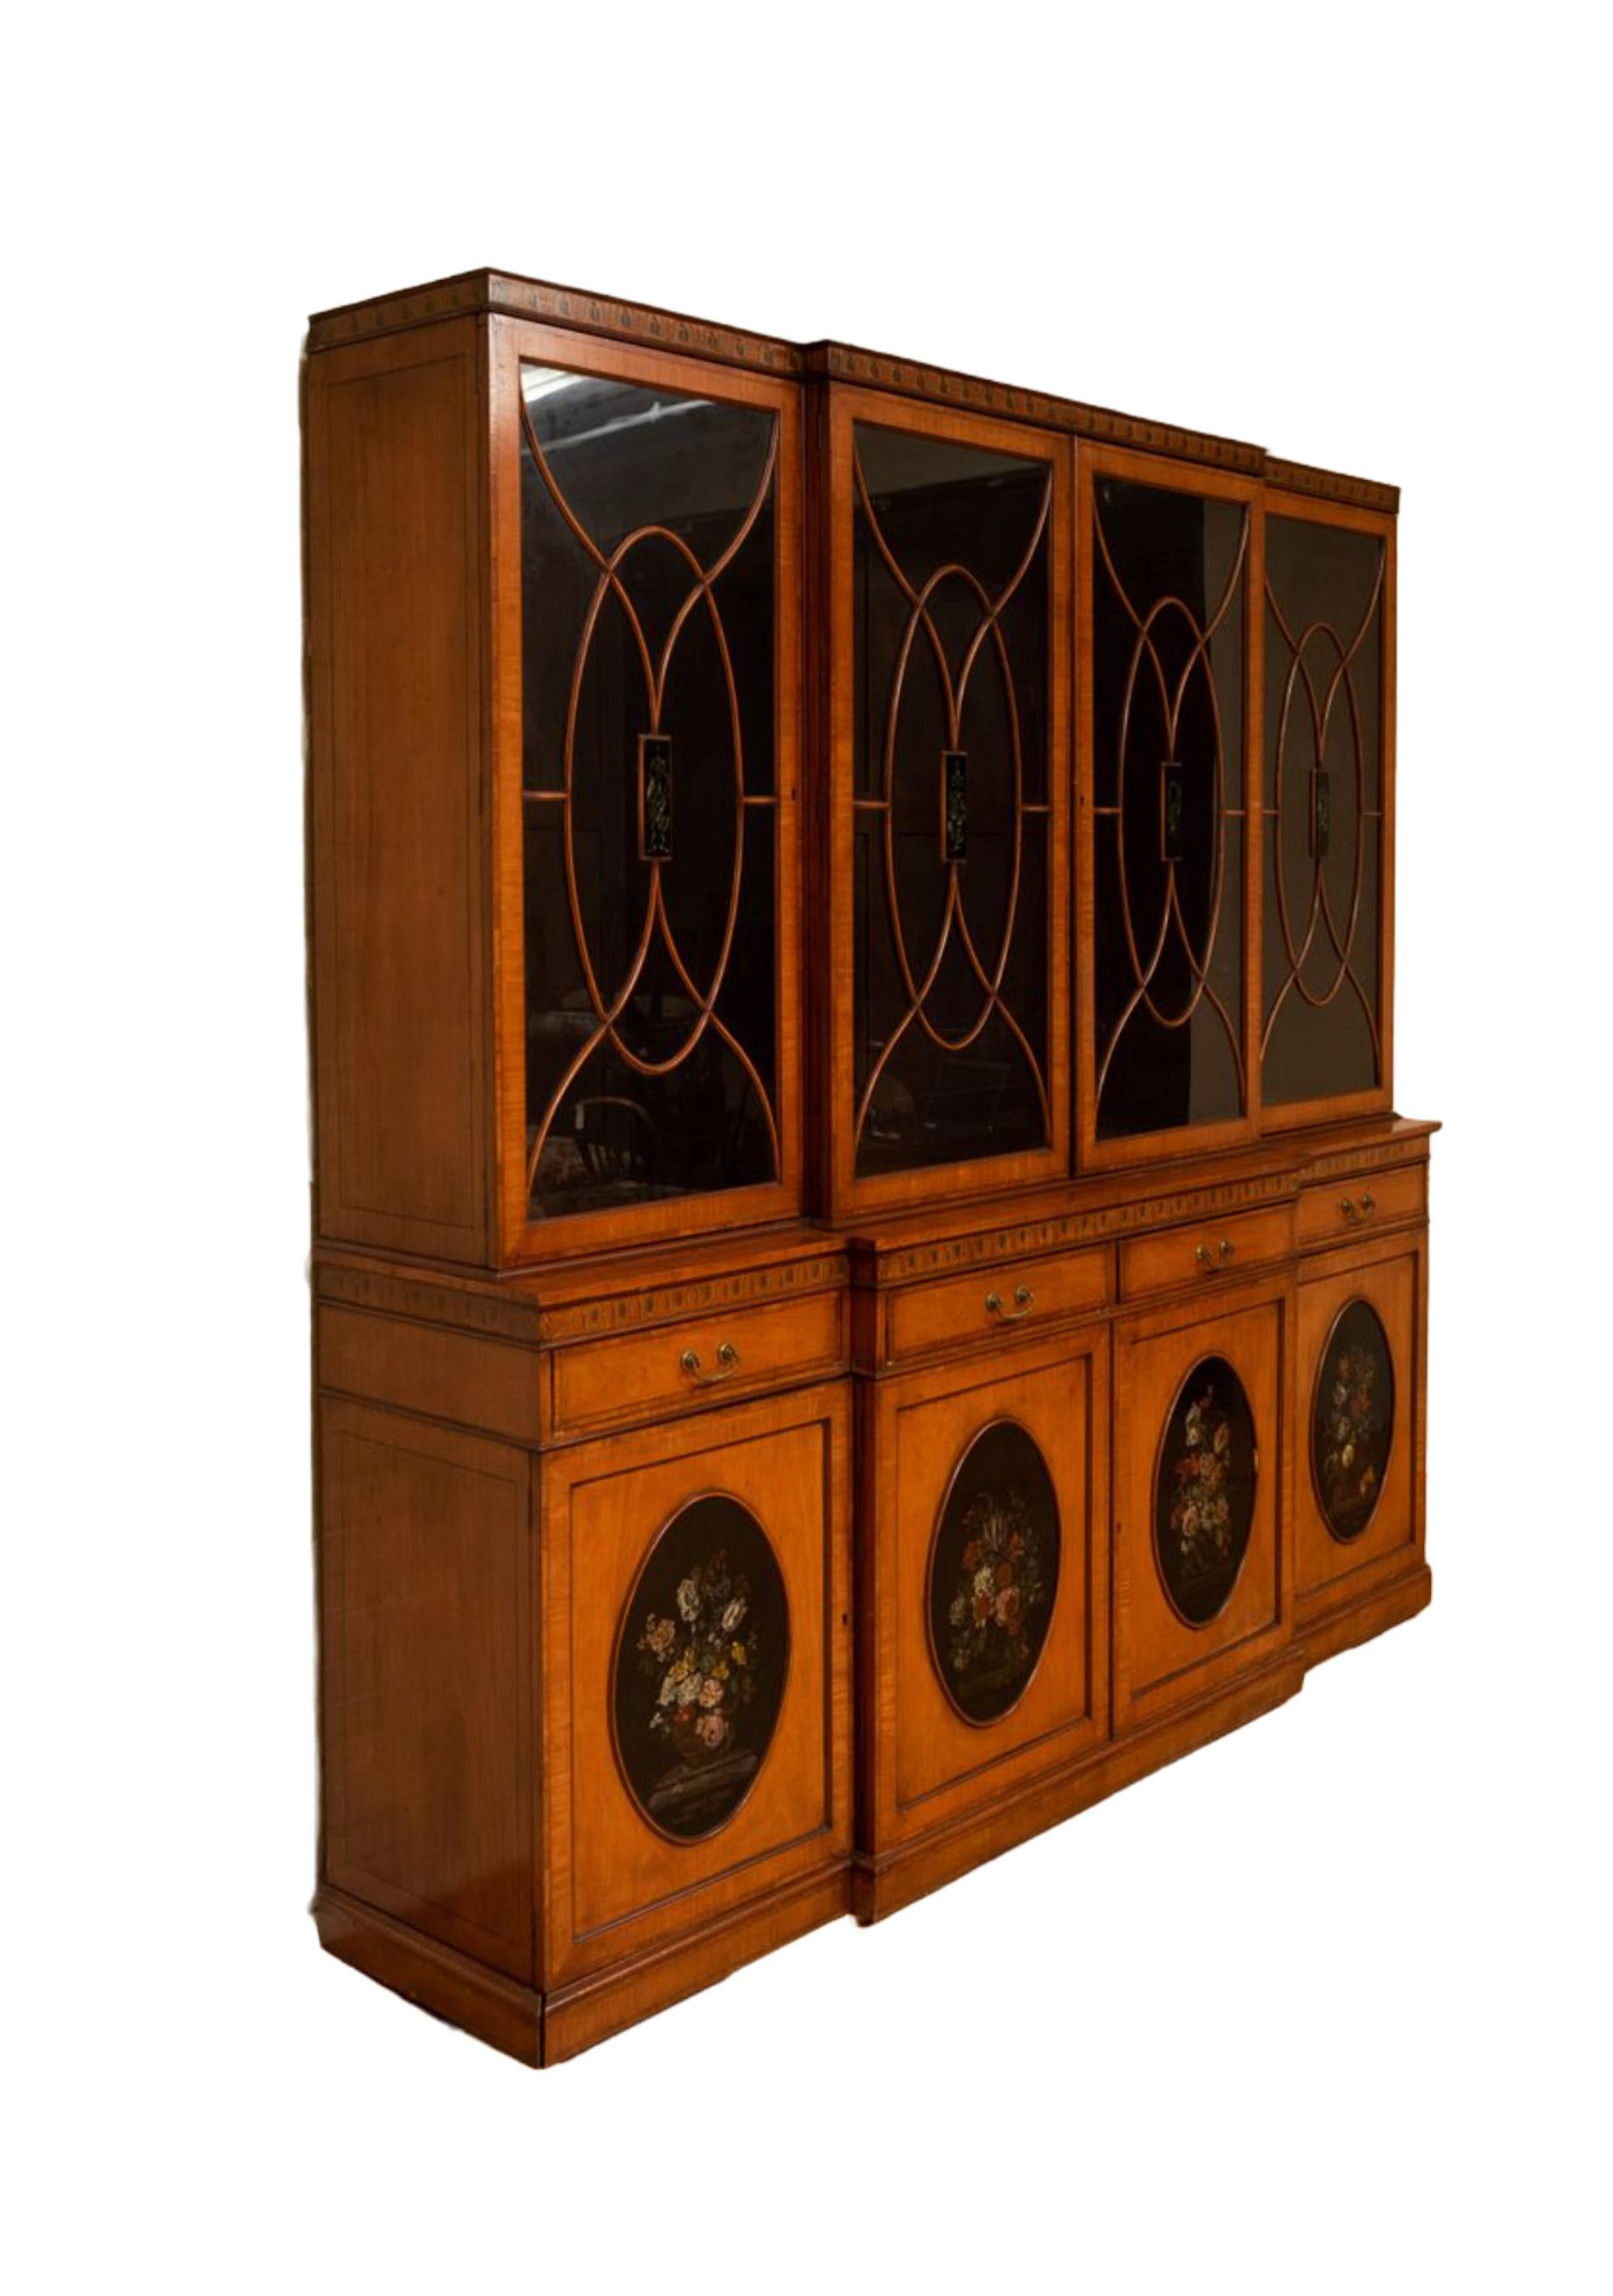 Beautiful craftsmanship mahogany bookcase / china cabinet in the Edwardian style with a flat top molded cornice above four cross-banded glazed doors. Each features a centered hand painted musical trophy panel design details. The outset of the lower